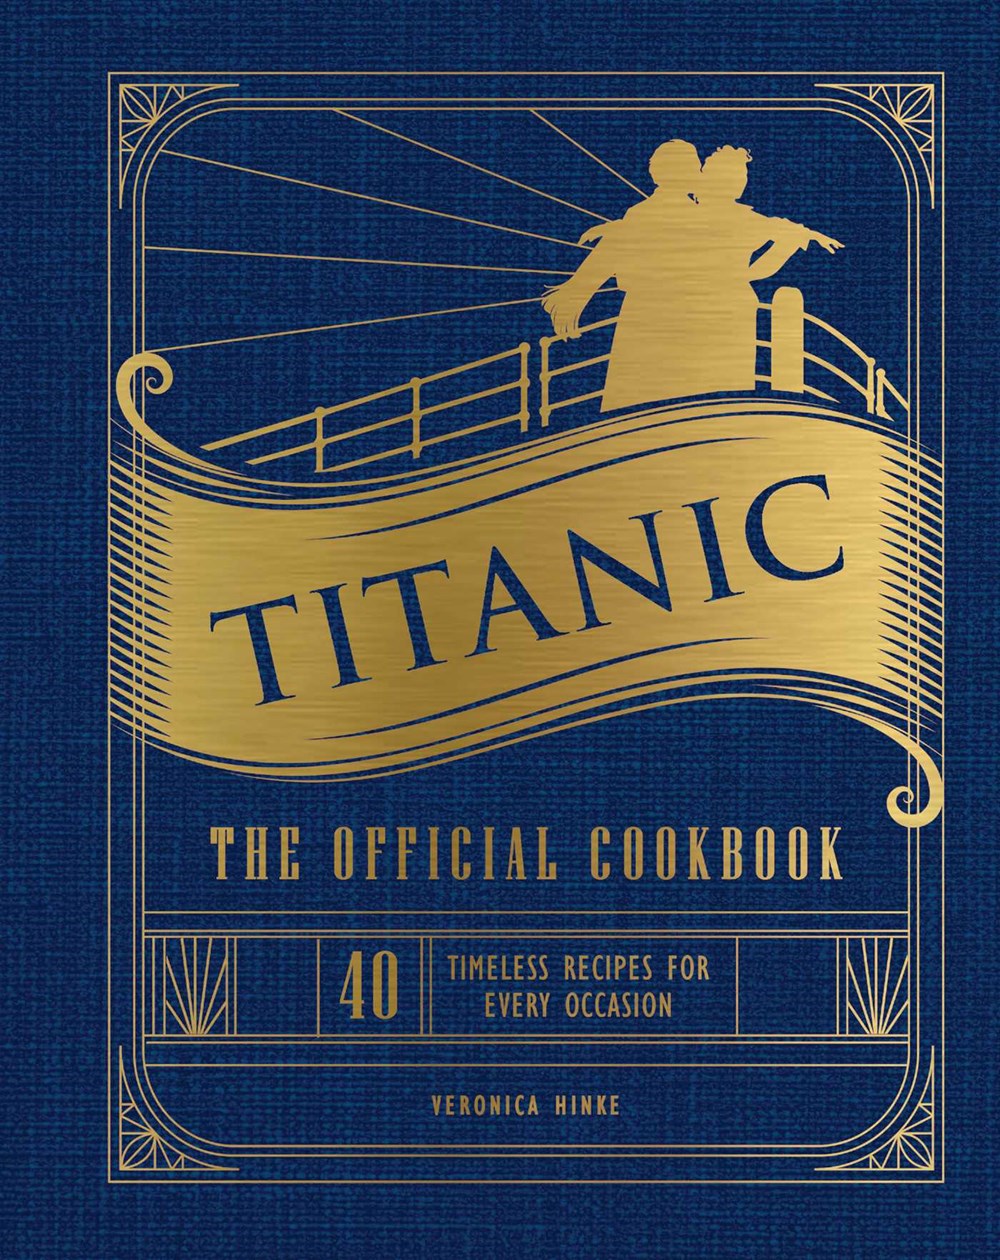 A blue book cover with gold text saying "titanic: the official cookbook." A gold-colored silhouette of Jack and Rose from the movie "titanic" is at the top.